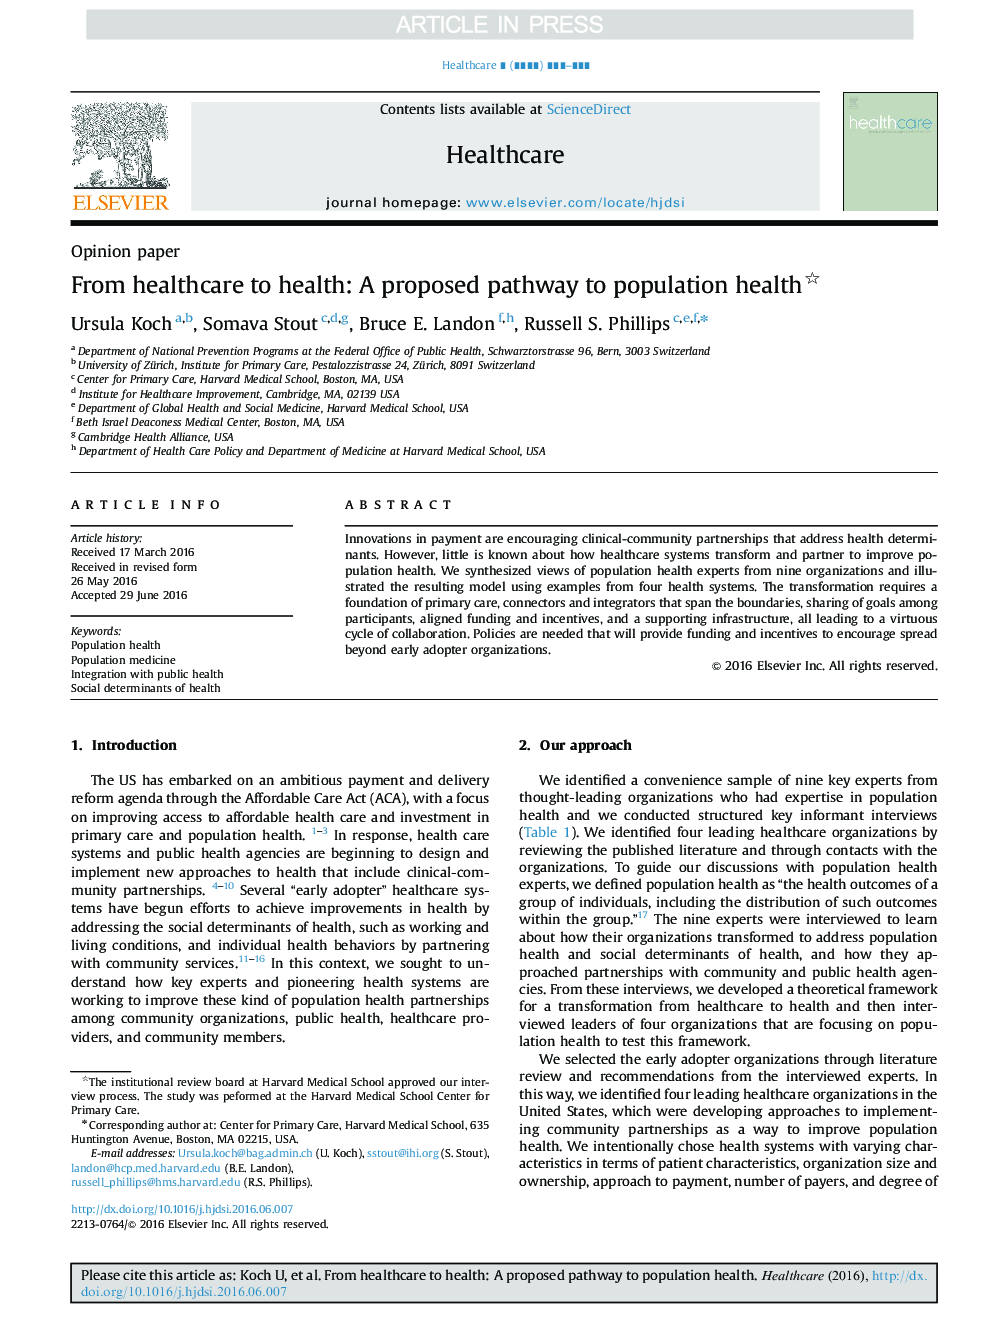 From healthcare to health: A proposed pathway to population health